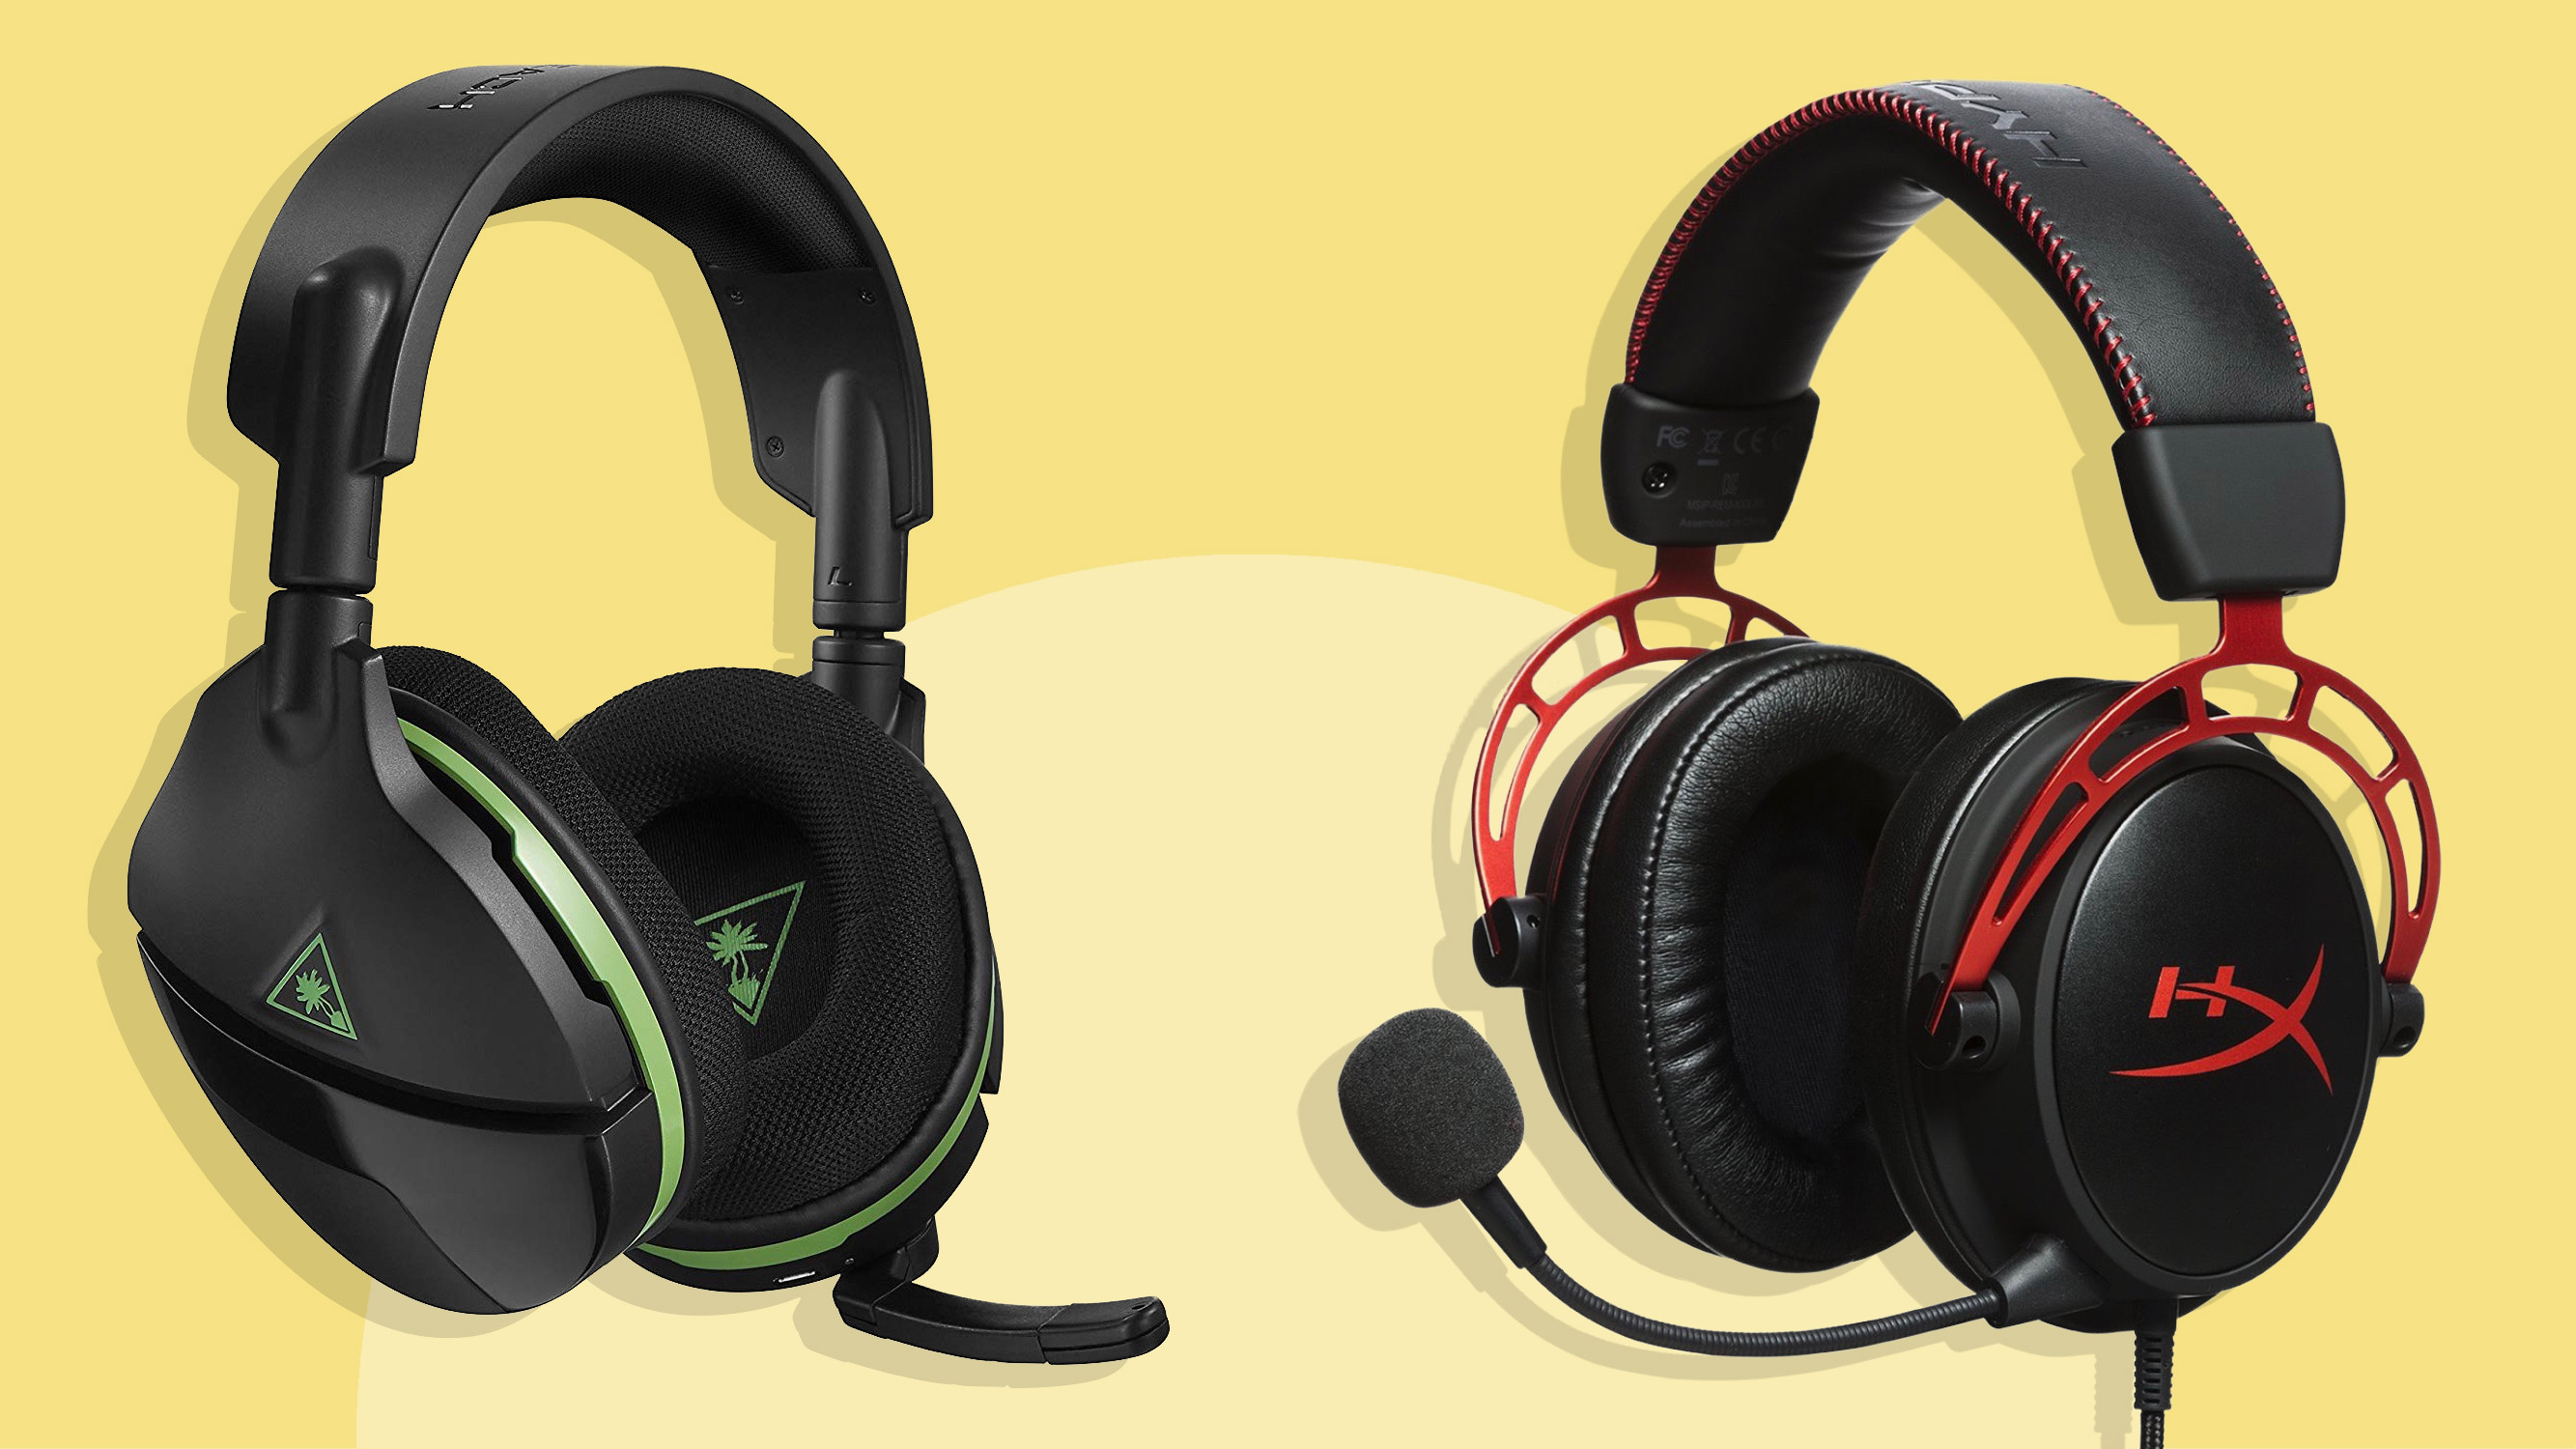 Weiland Karu Impressionisme Best gaming headset 2020: for PS4, Xbox One and PC